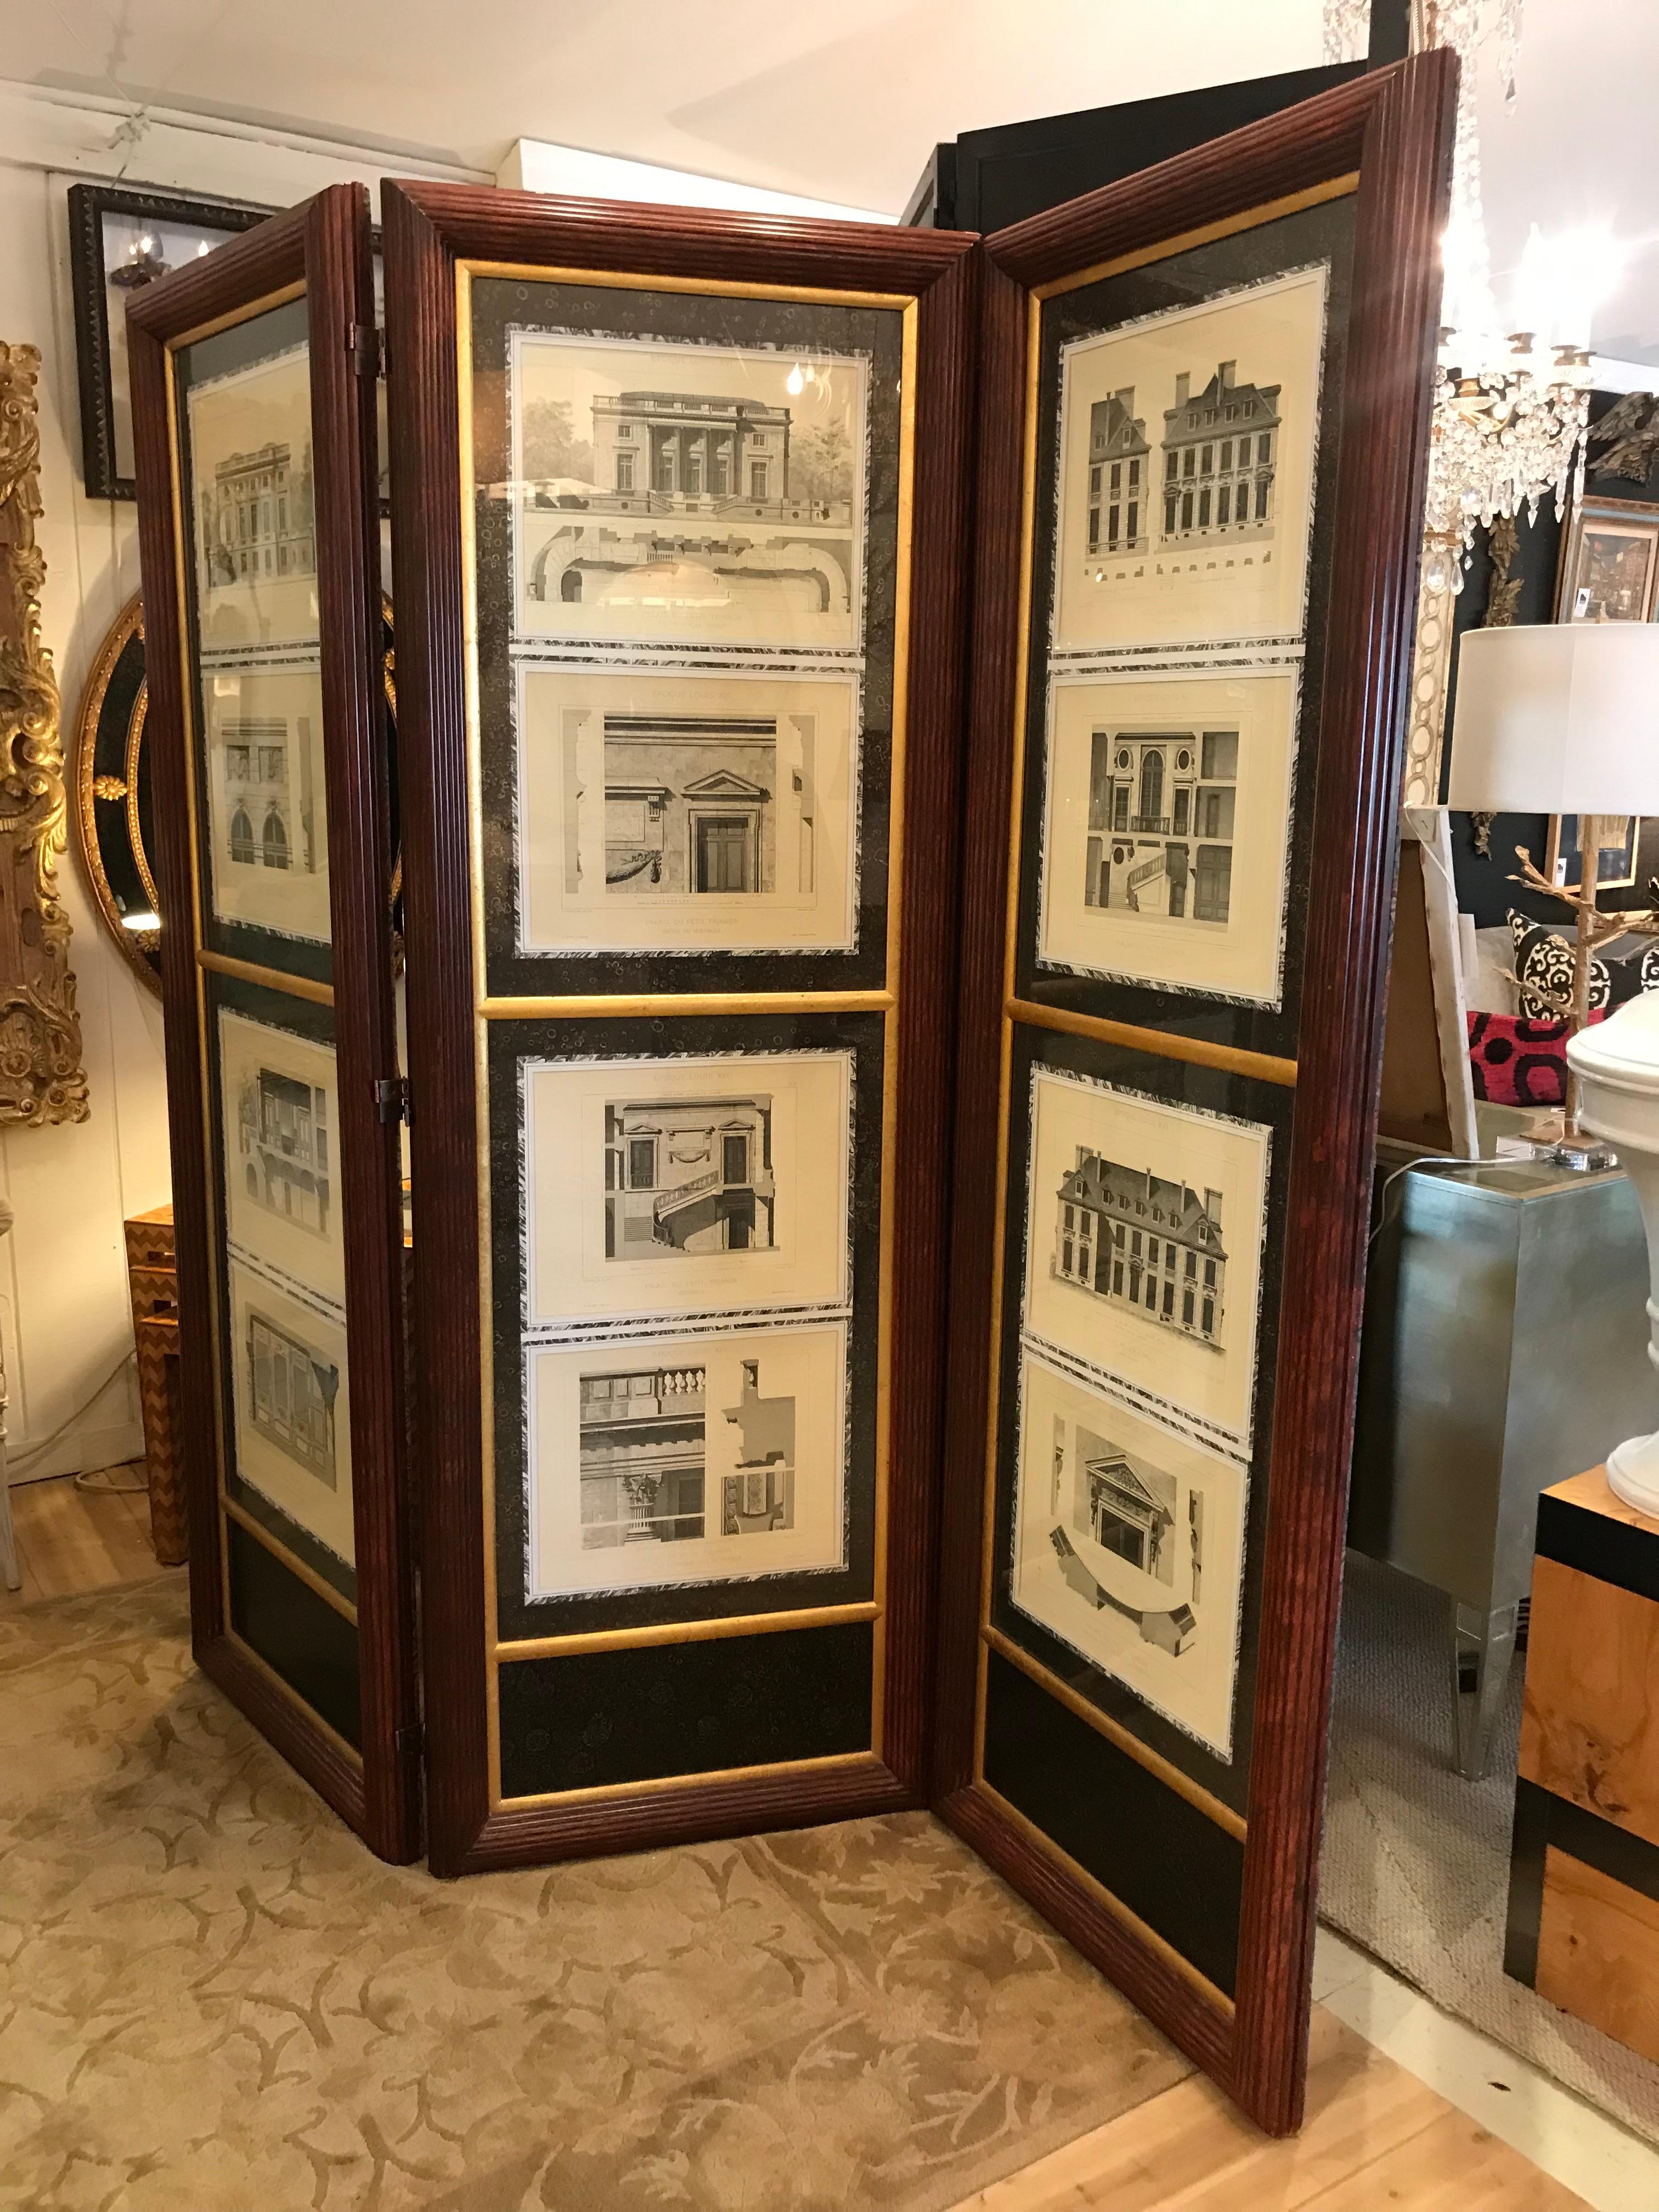 Stately screen or room divider in mahogany and glass that showcases architectural renderings of French buildings. The drawings have Italian paper surrounds and gilt moldings. The mahogany framing is fluted. The reverse side of screen is a dark